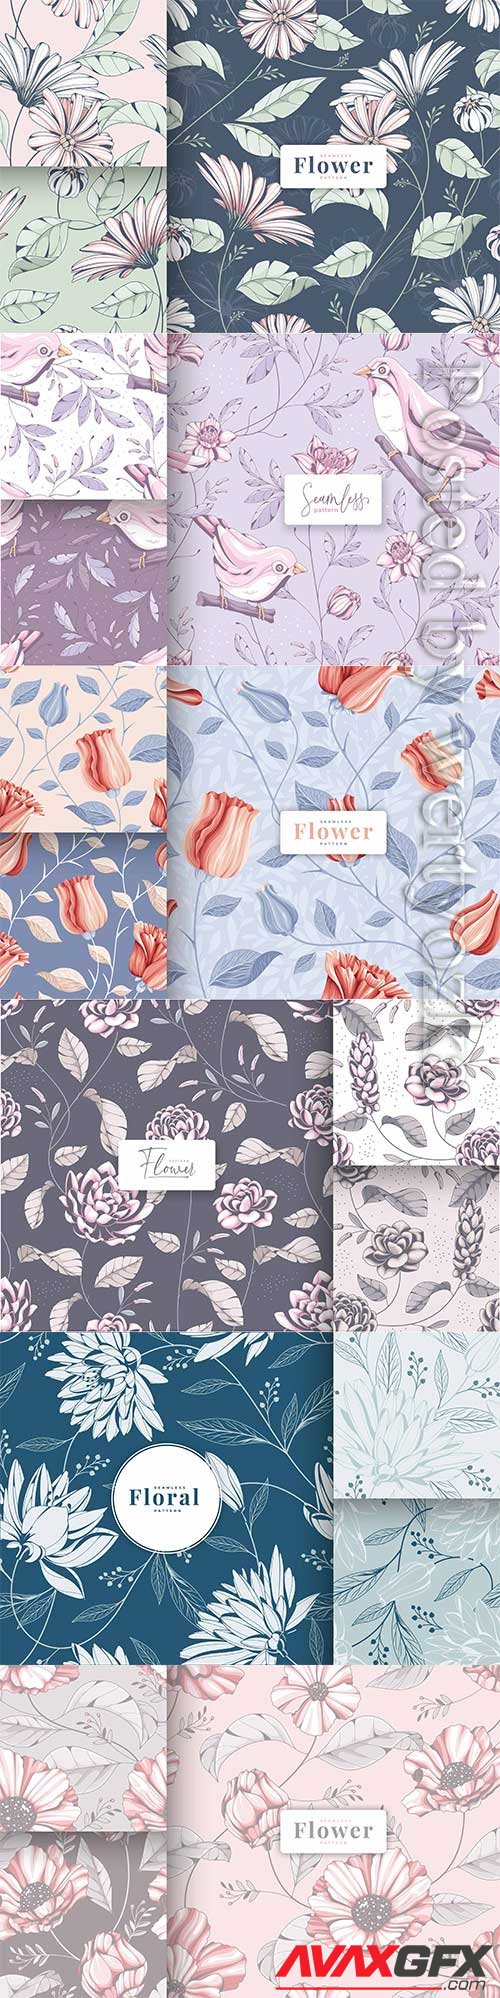 Vector hand drawn vintage floral seamless pattern